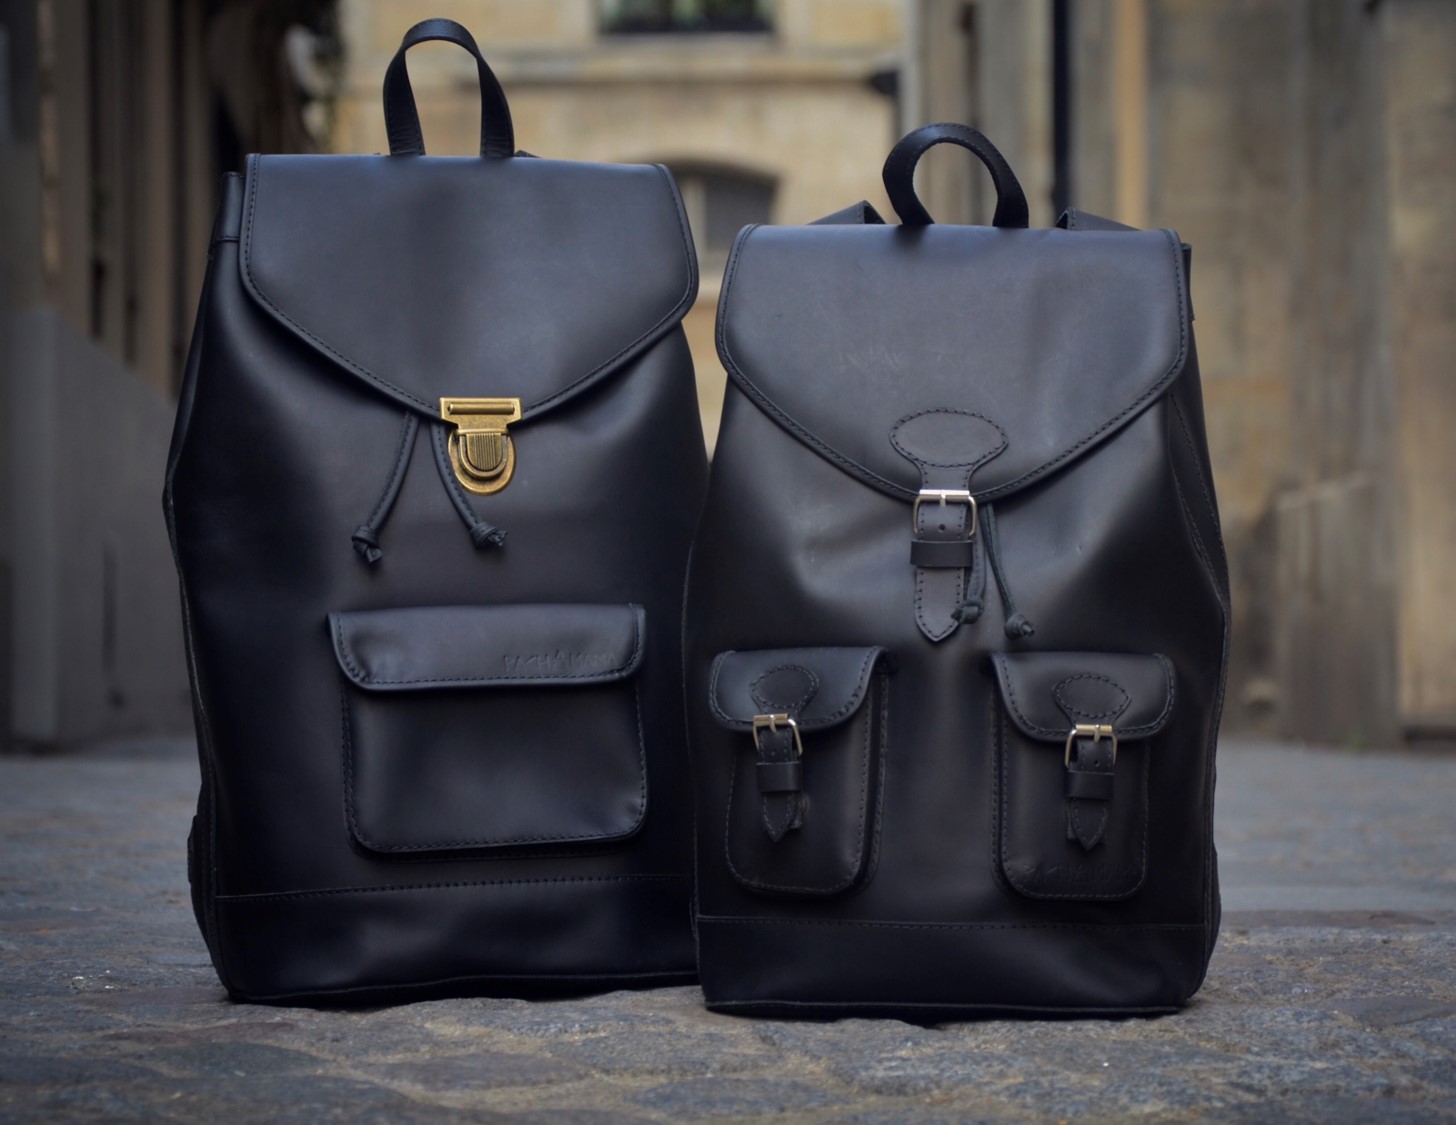 Pachamama - JOE black leather backpack - Urban leather backpack for men